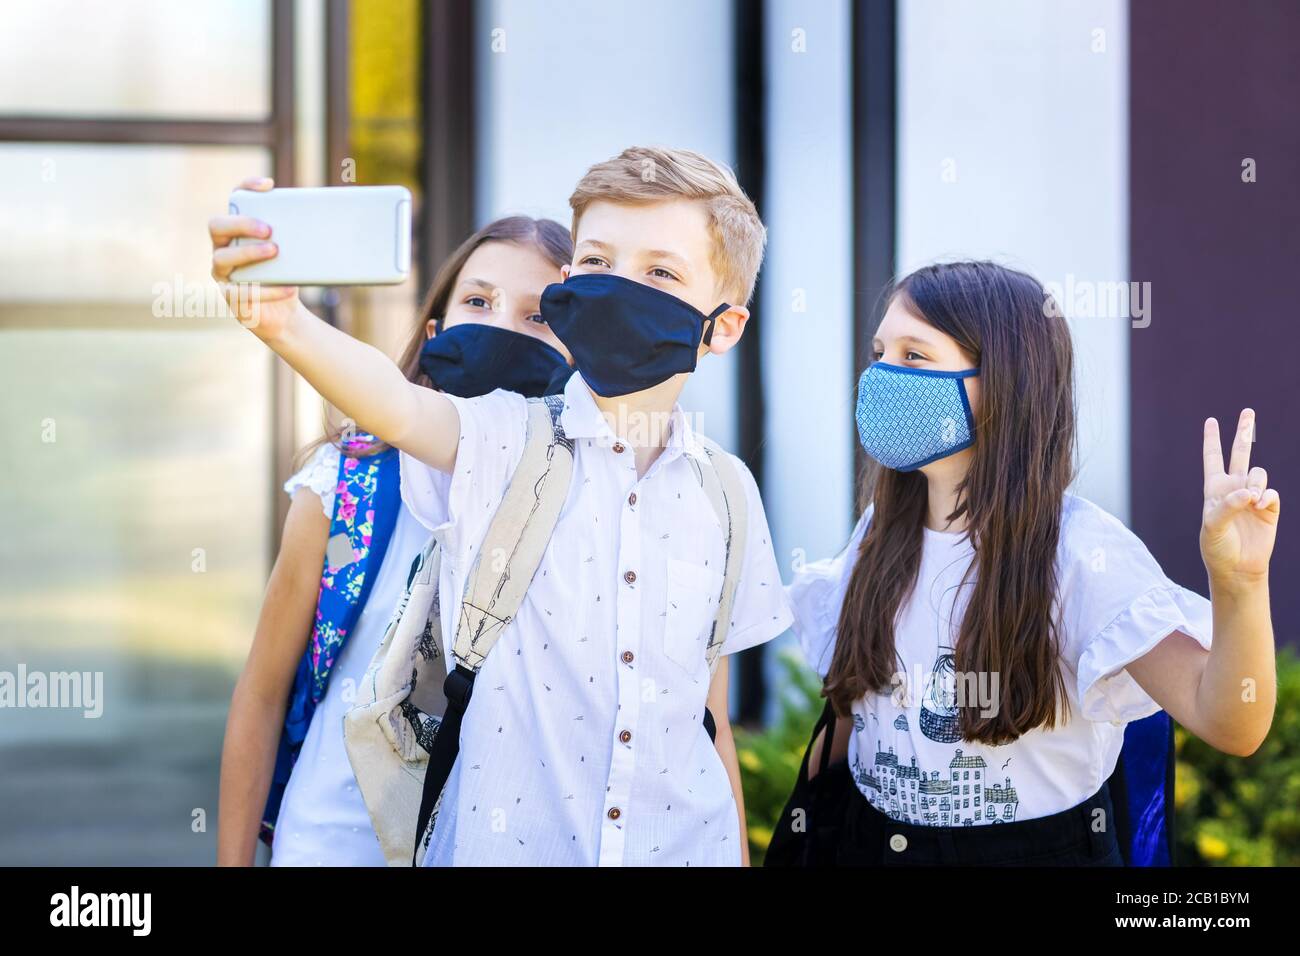 School children wearing protective face masks while taking selfie at school reopening Stock Photo